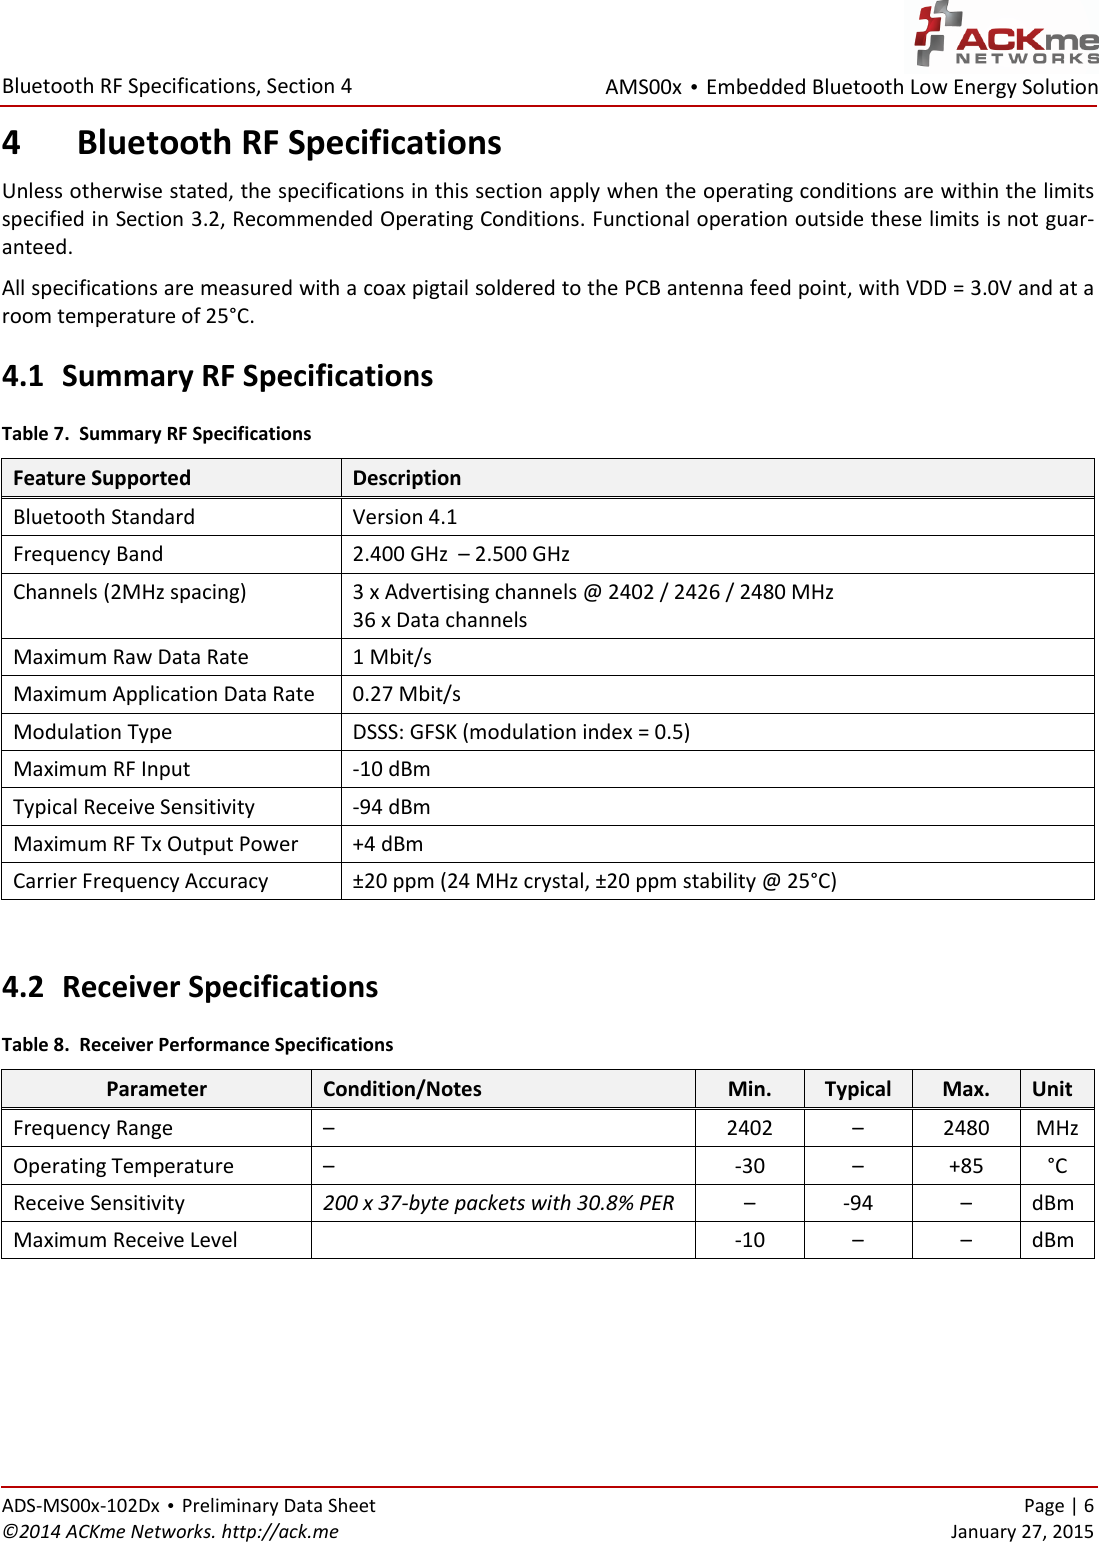 AMS00x • Embedded Bluetooth Low Energy Solution  Bluetooth RF Specifications, Section 4 ADS-MS00x-102Dx • Preliminary Data Sheet    Page | 6 ©2014 ACKme Networks. http://ack.me    January 27, 2015 4 Bluetooth RF Specifications Unless otherwise stated, the specifications in this section apply when the operating conditions are within the limits specified in Section 3.2, Recommended Operating Conditions. Functional operation outside these limits is not guar-anteed. All specifications are measured with a coax pigtail soldered to the PCB antenna feed point, with VDD = 3.0V and at a room temperature of 25°C.  4.1 Summary RF Specifications Table 7.  Summary RF Specifications Feature Supported Description Bluetooth Standard Version 4.1 Frequency Band 2.400 GHz  – 2.500 GHz Channels (2MHz spacing) 3 x Advertising channels @ 2402 / 2426 / 2480 MHz 36 x Data channels Maximum Raw Data Rate 1 Mbit/s Maximum Application Data Rate 0.27 Mbit/s Modulation Type DSSS: GFSK (modulation index = 0.5) Maximum RF Input -10 dBm Typical Receive Sensitivity -94 dBm Maximum RF Tx Output Power +4 dBm Carrier Frequency Accuracy ±20 ppm (24 MHz crystal, ±20 ppm stability @ 25°C)  4.2 Receiver Specifications Table 8.  Receiver Performance Specifications Parameter Condition/Notes Min. Typical Max. Unit Frequency Range –  2402 – 2480 MHz Operating Temperature – -30 – +85 °C Receive Sensitivity 200 x 37-byte packets with 30.8% PER – -94 – dBm Maximum Receive Level  -10 – – dBm    